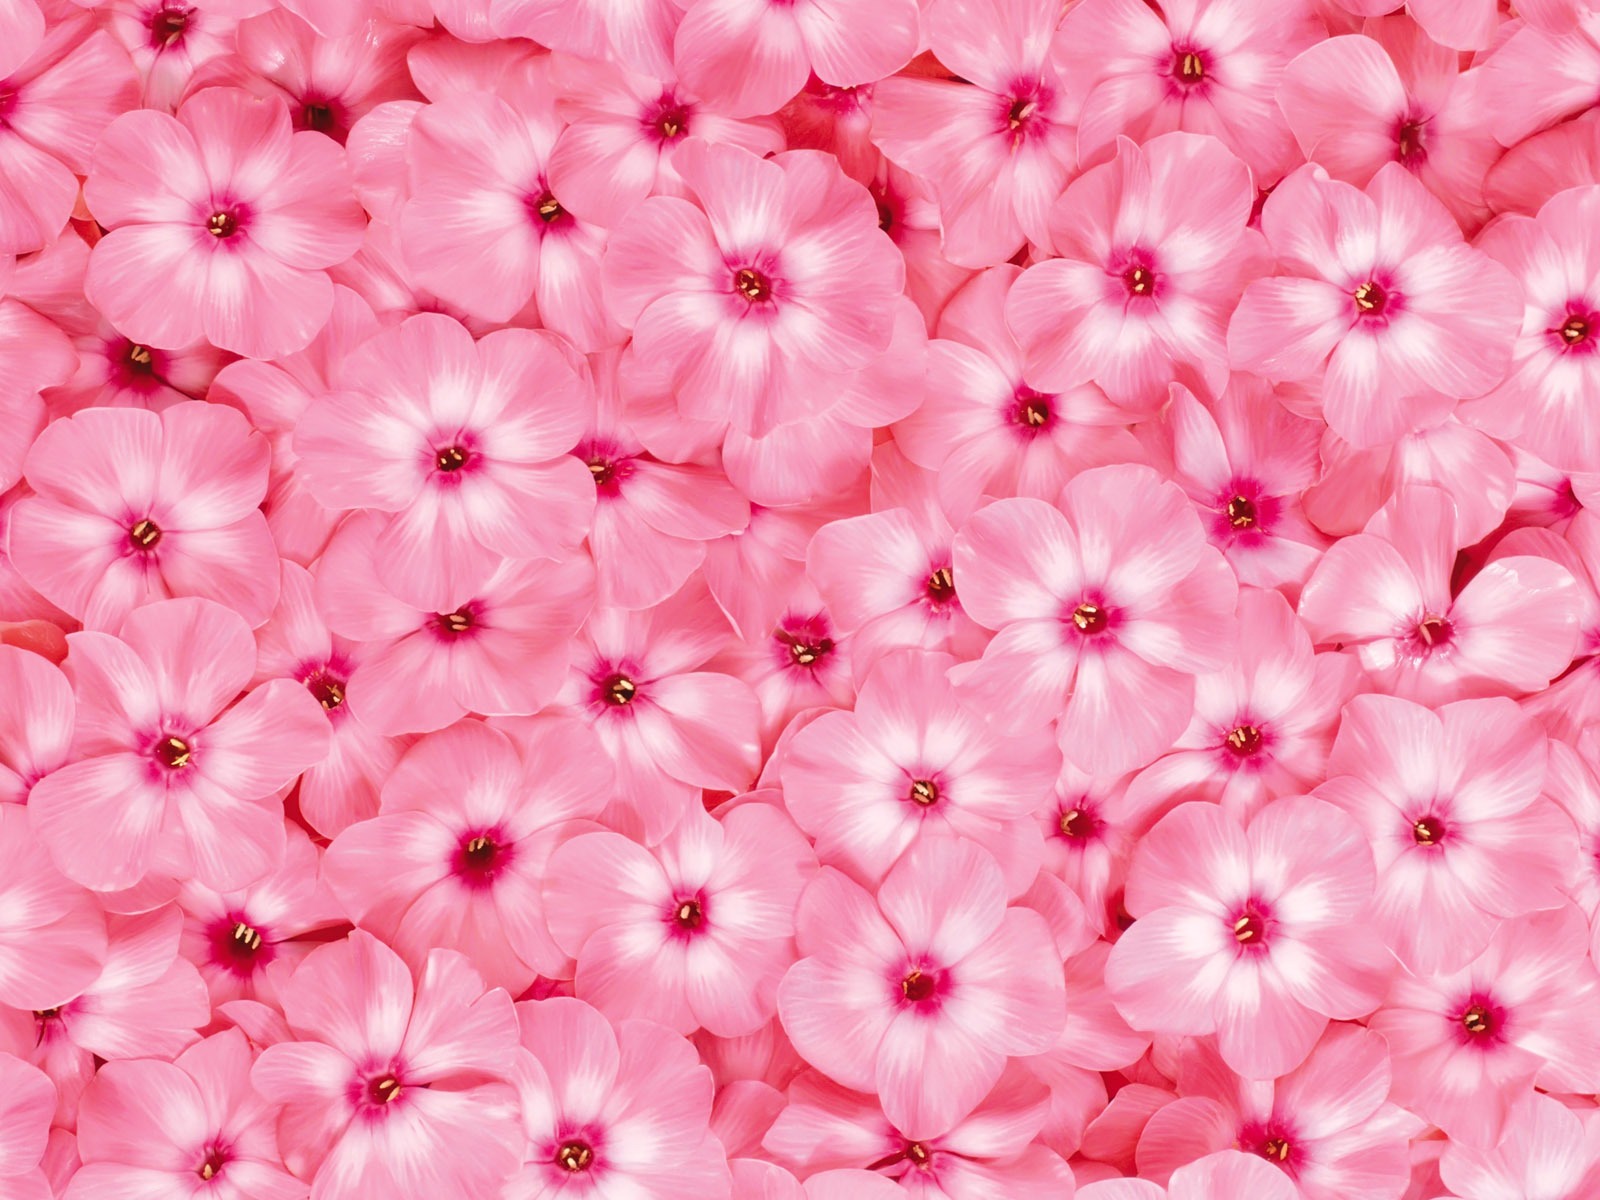 Surrounded by stunning flowers wallpaper #14 - 1600x1200